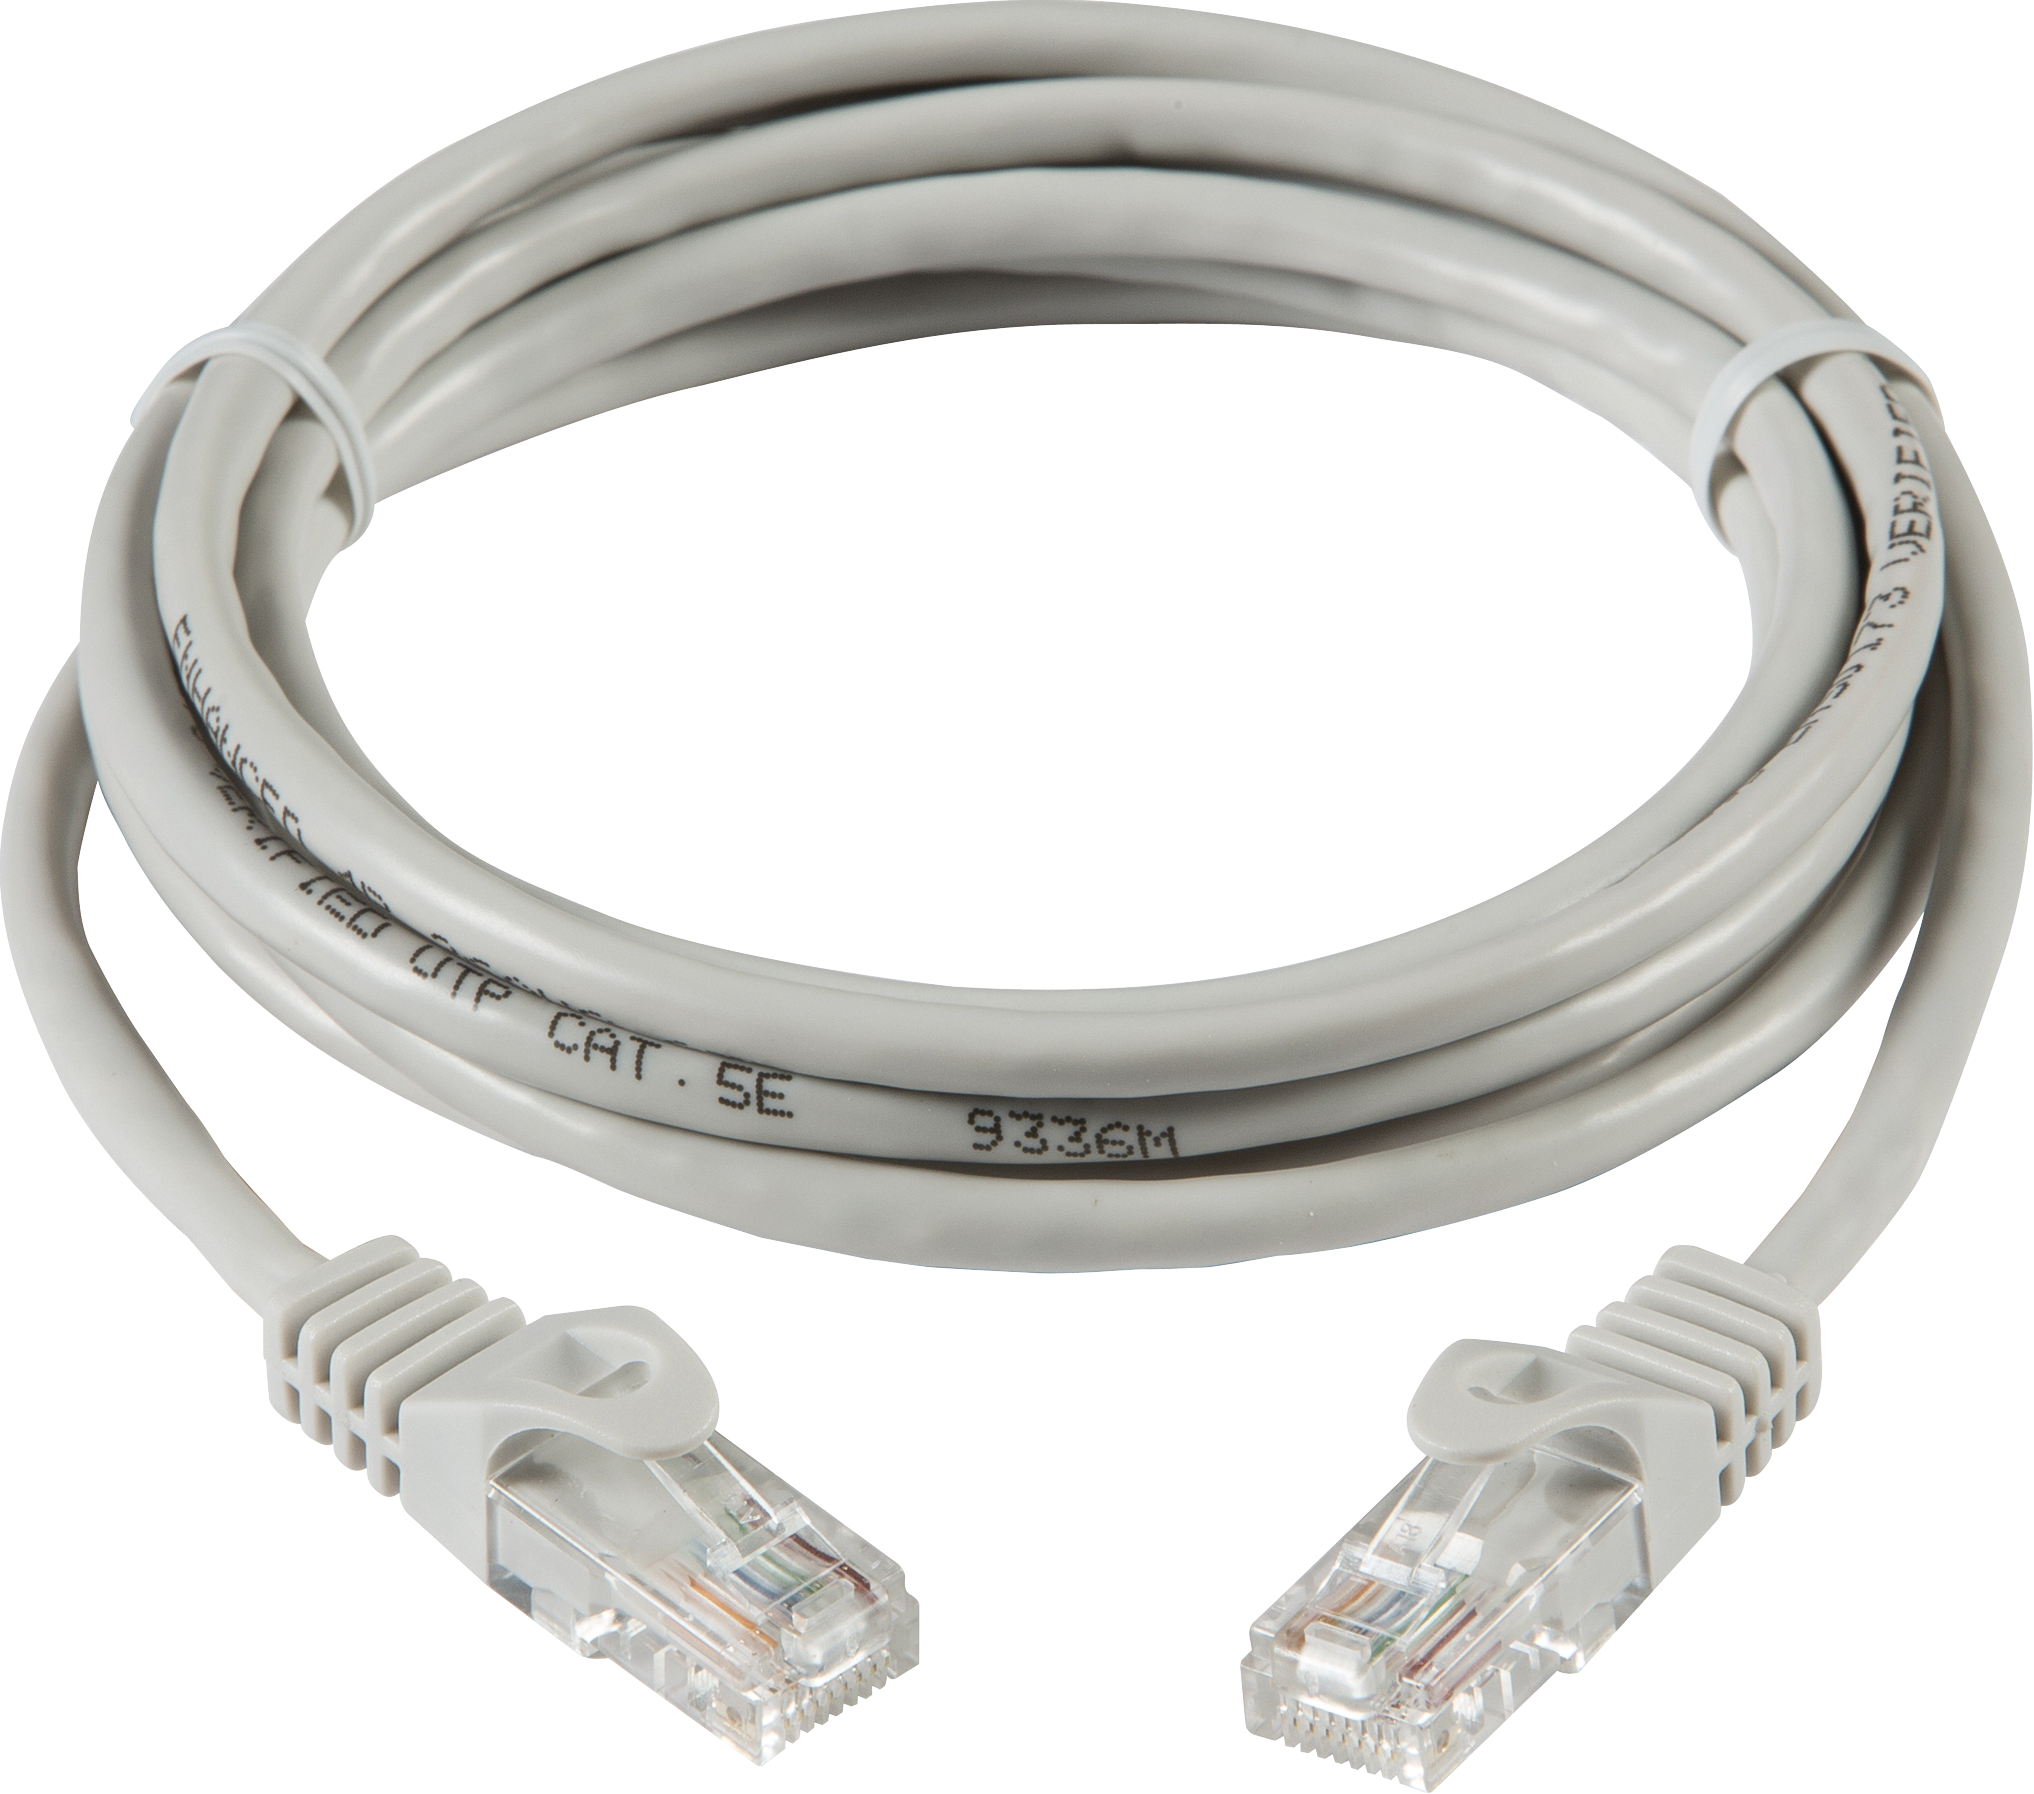 10m UTP CAT5e Networking Cable - Grey - NETC510M 